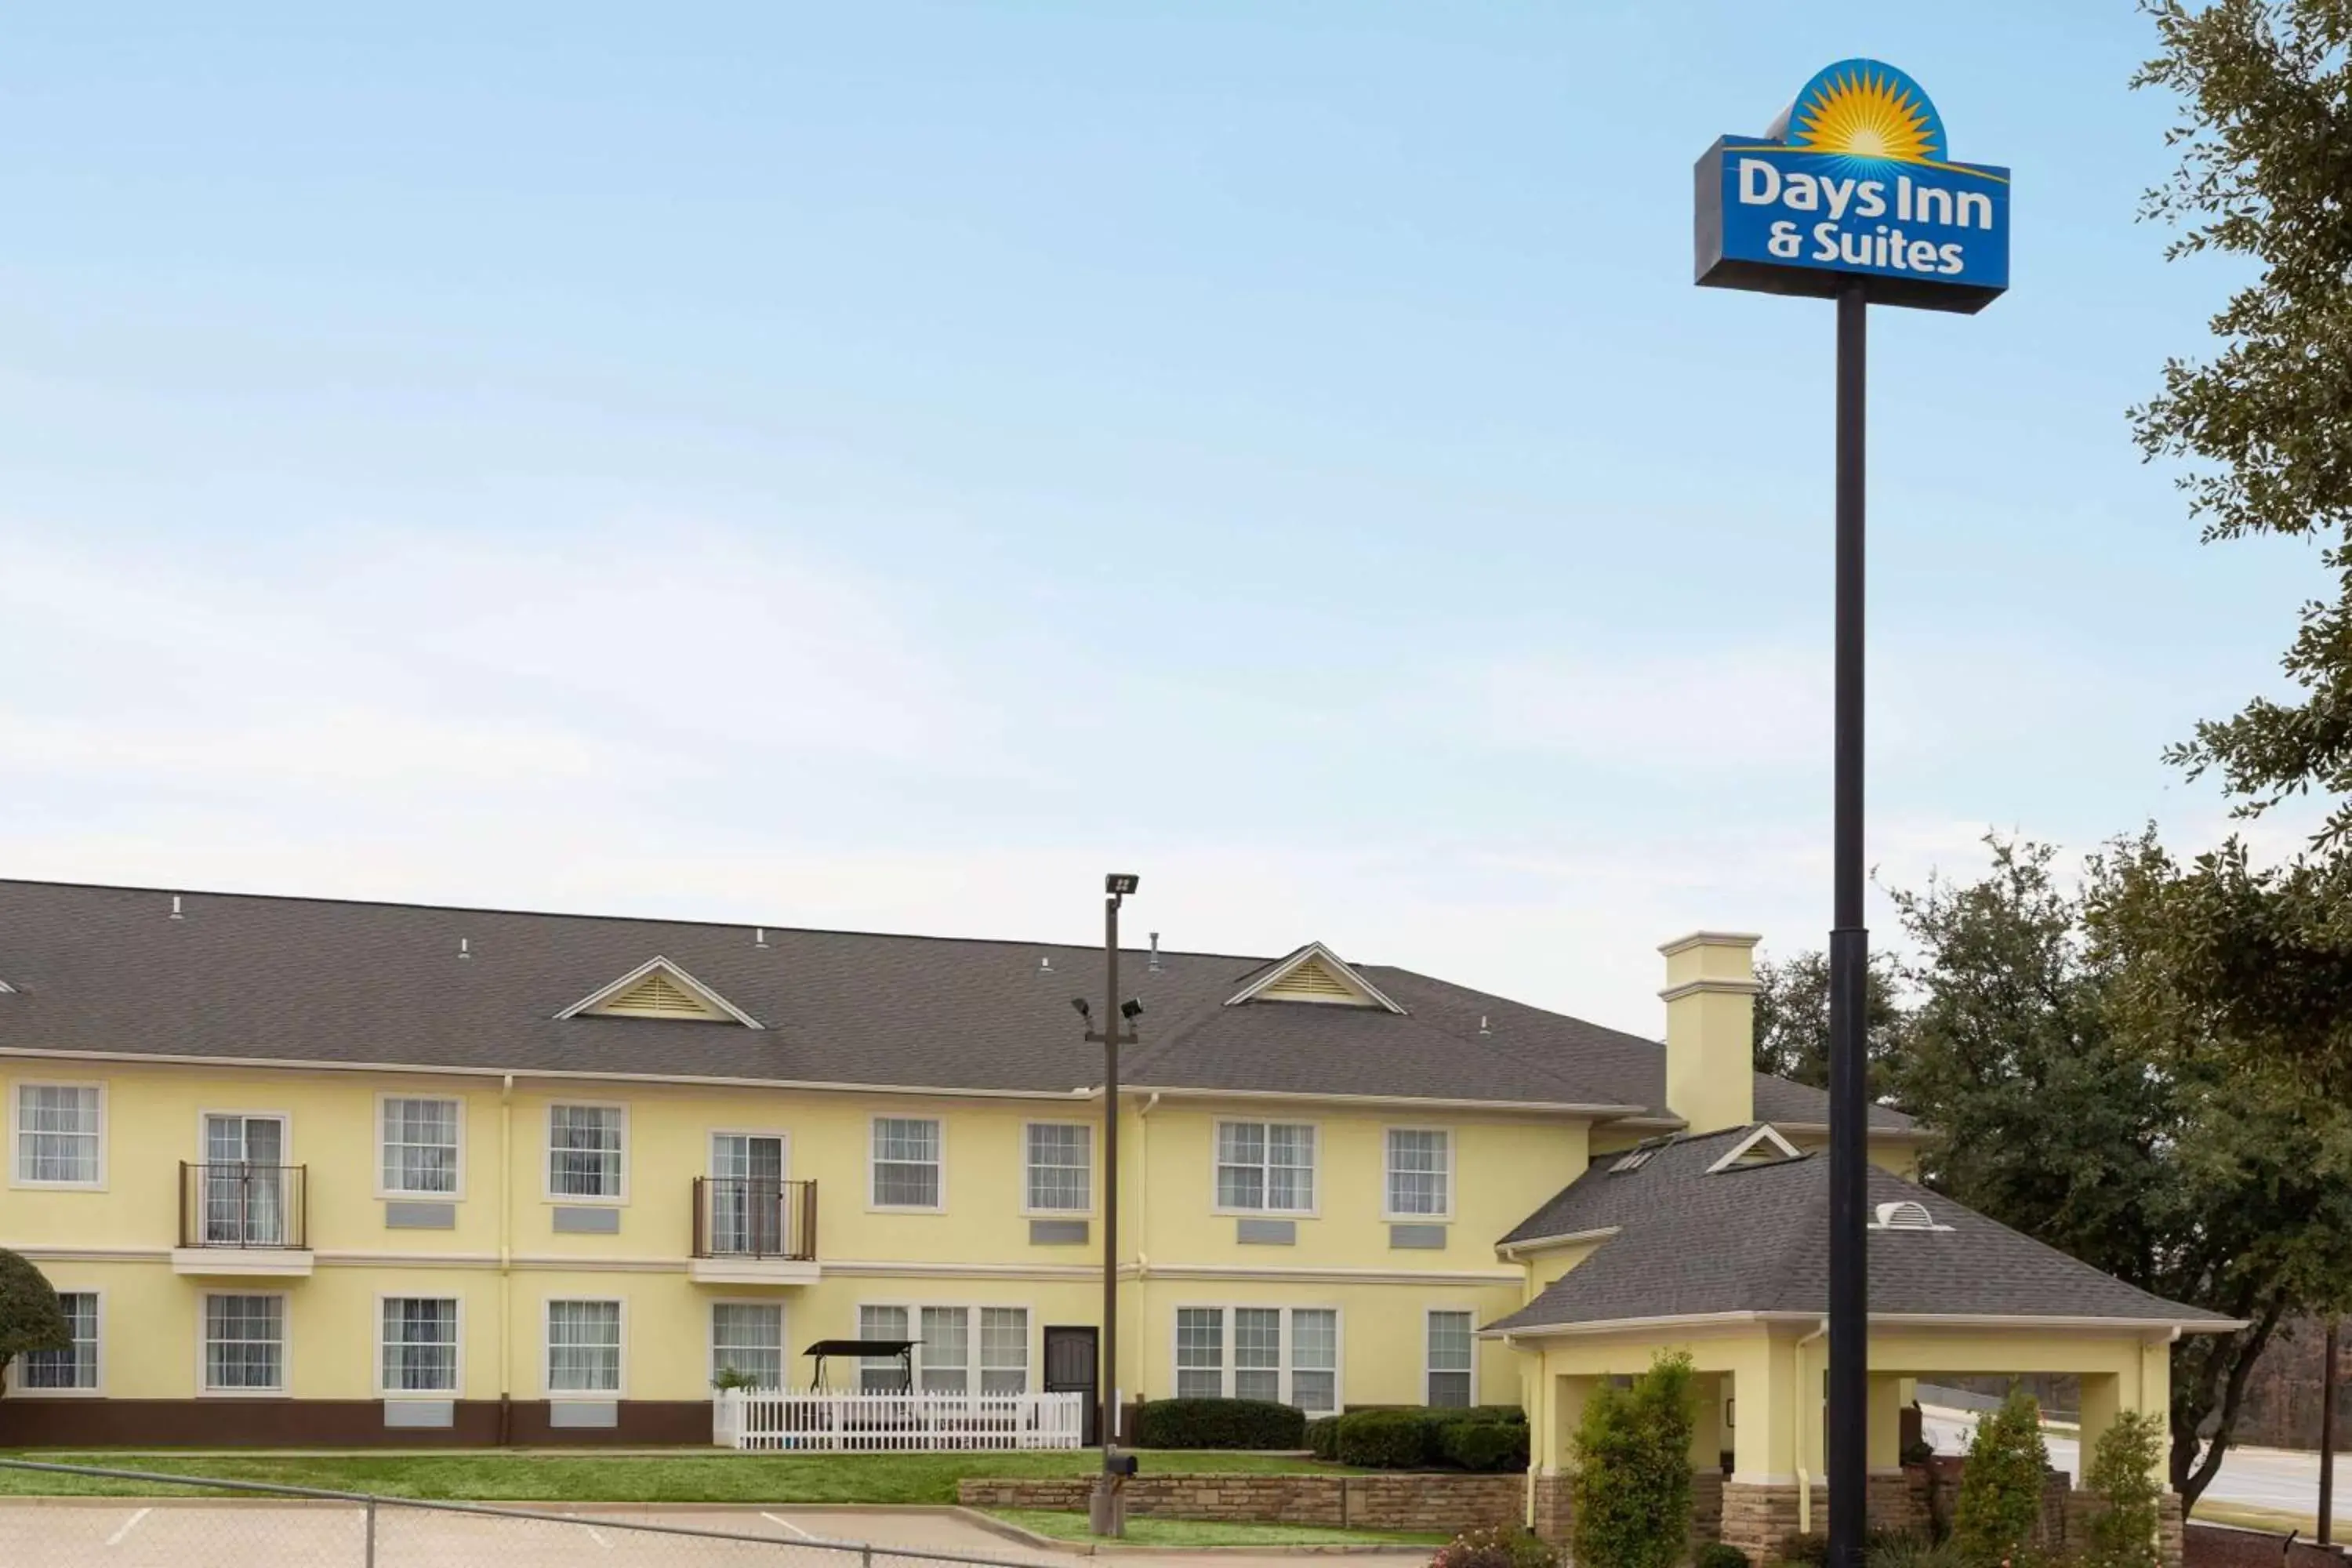 Property building in Days Inn & Suites by Wyndham DFW Airport South-Euless